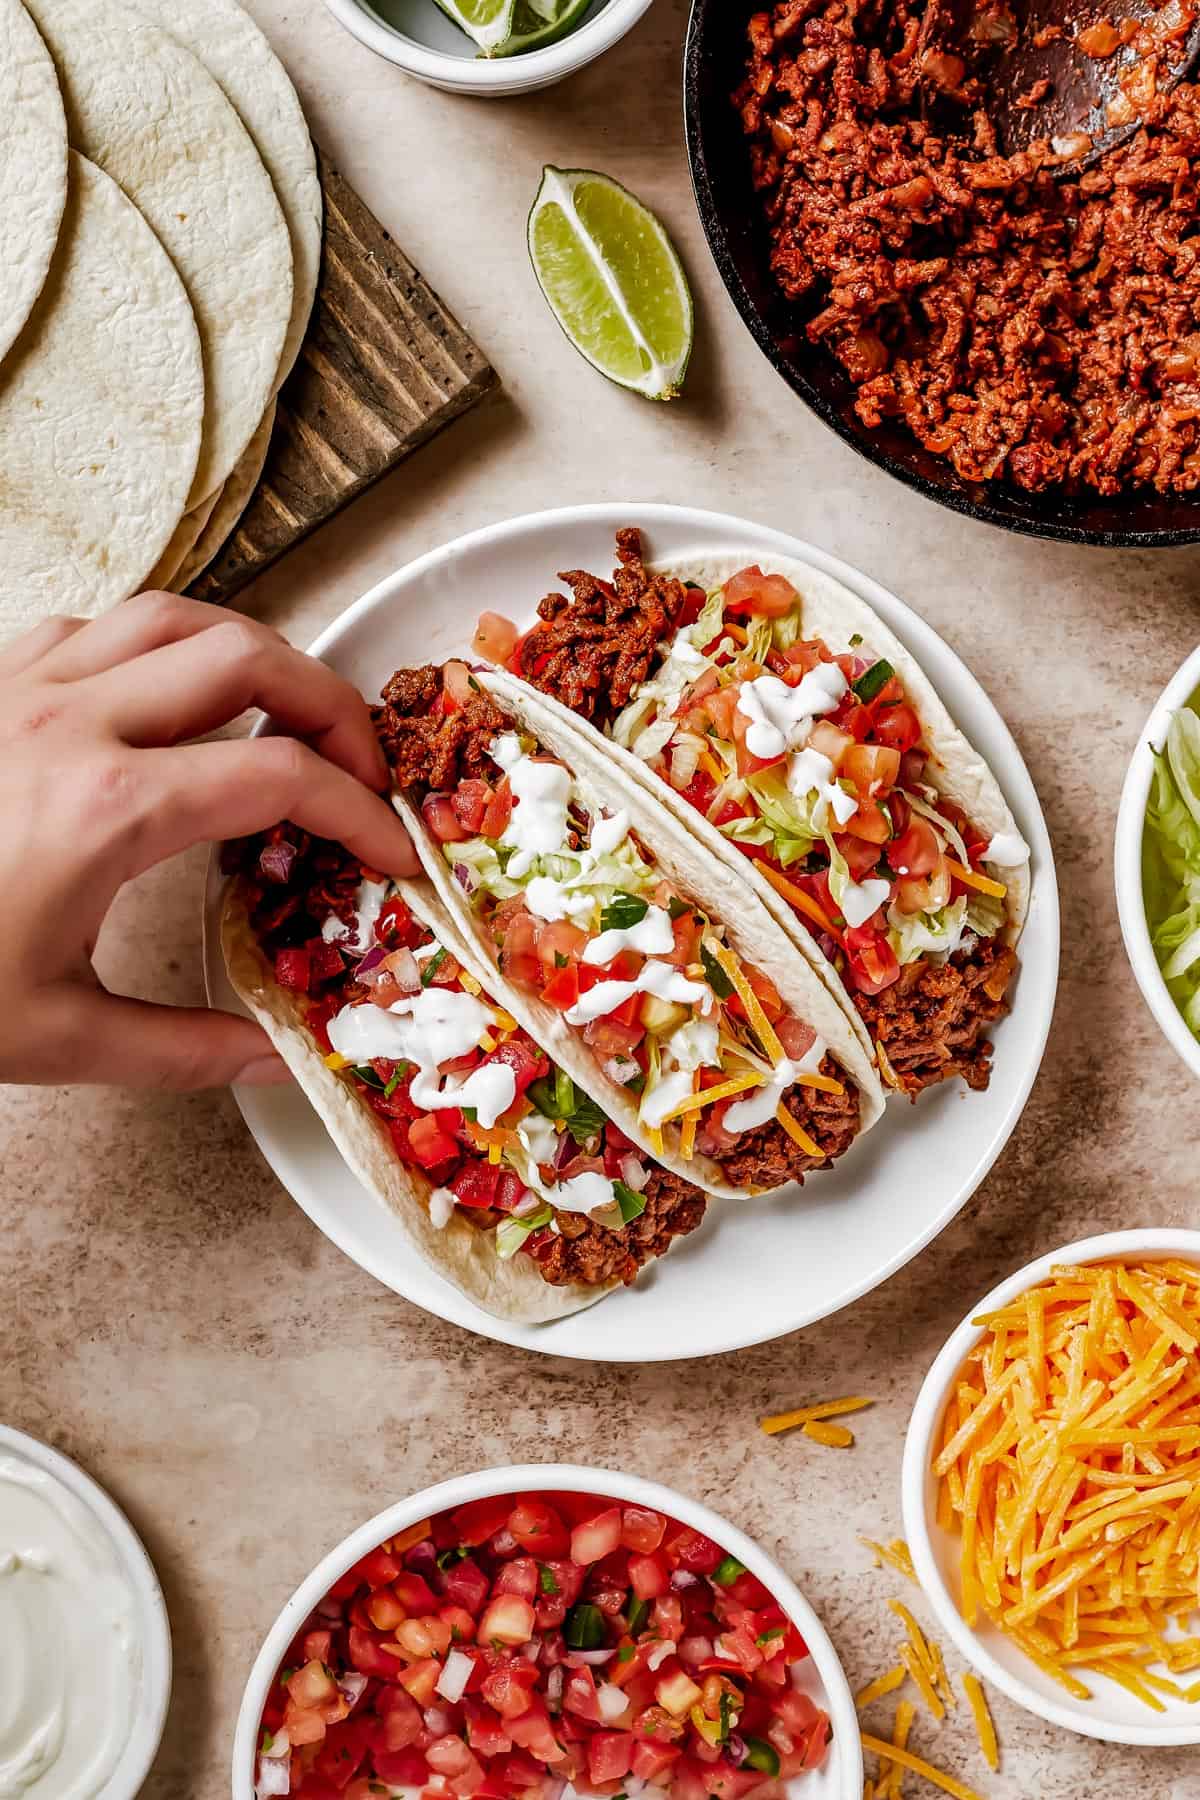 A woman's hand lifts a soft taco off of a plate.